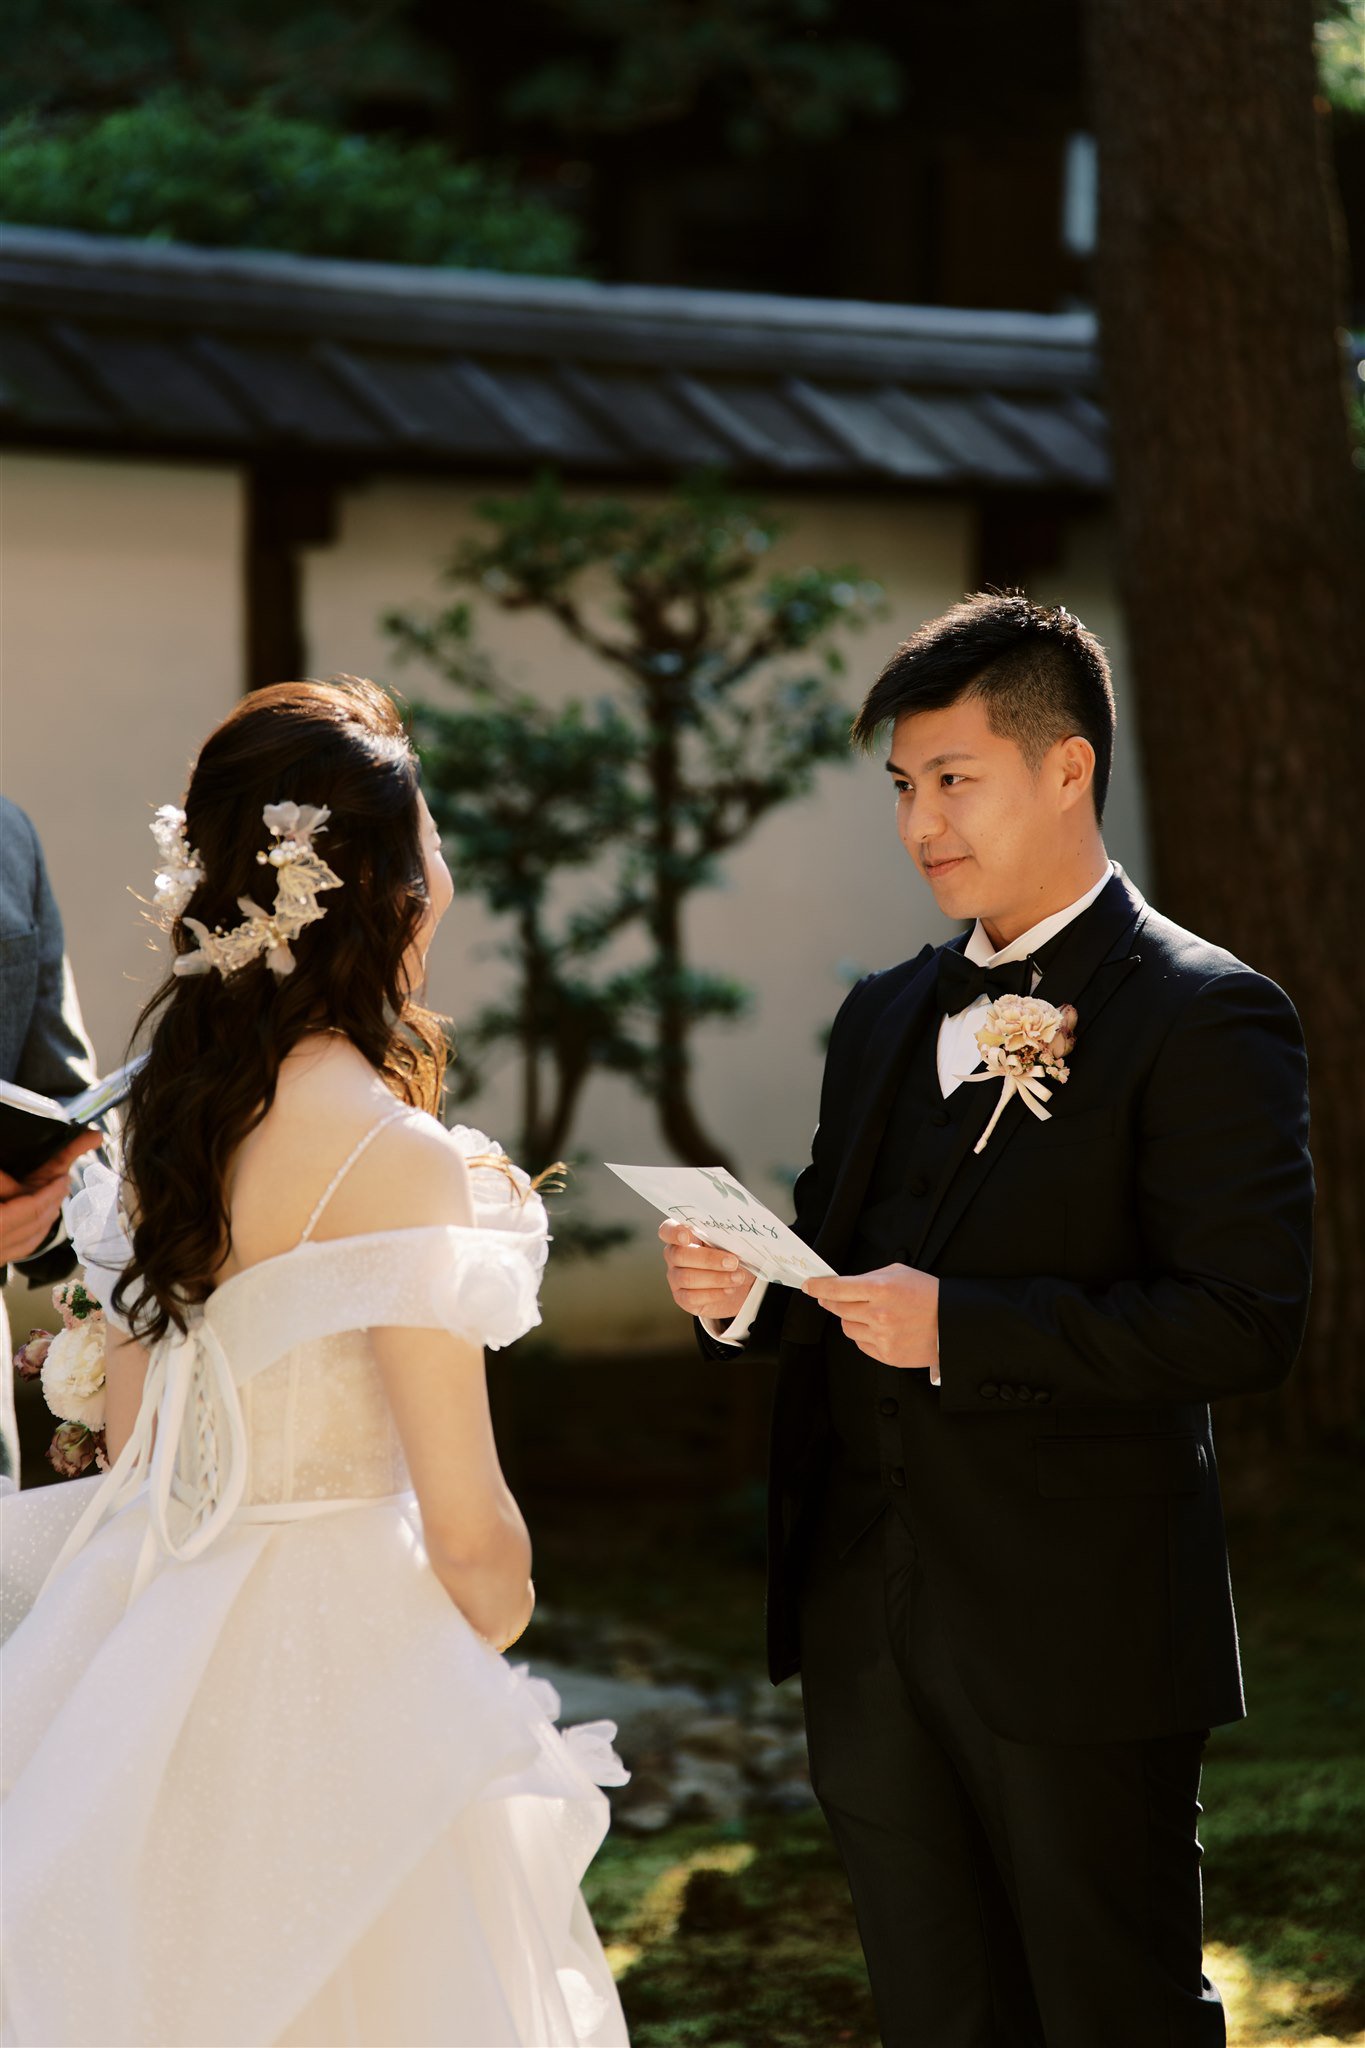 Kyoto Tokyo Japan Elopement Wedding Photographer, Planner & Videographer | A Japan elopement photographer captures the special moment as a bride and groom exchange vows in a serene garden.